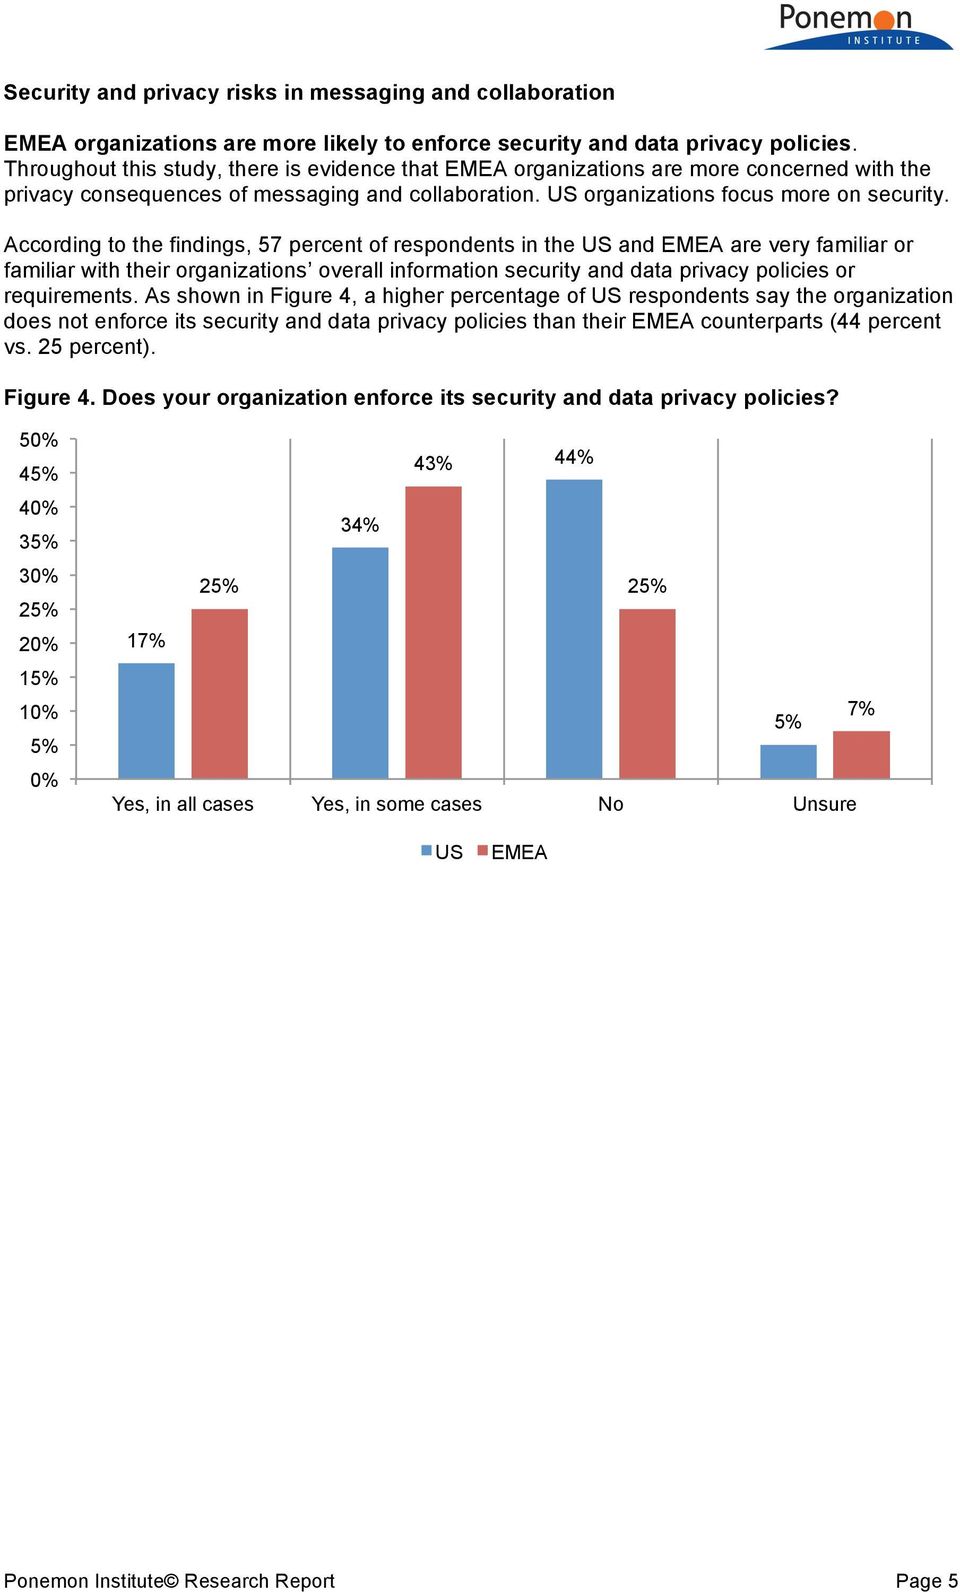 According to the findings, 57 percent of respondents in the US and EMEA are very familiar or familiar with their organizations overall information security and data privacy policies or requirements.